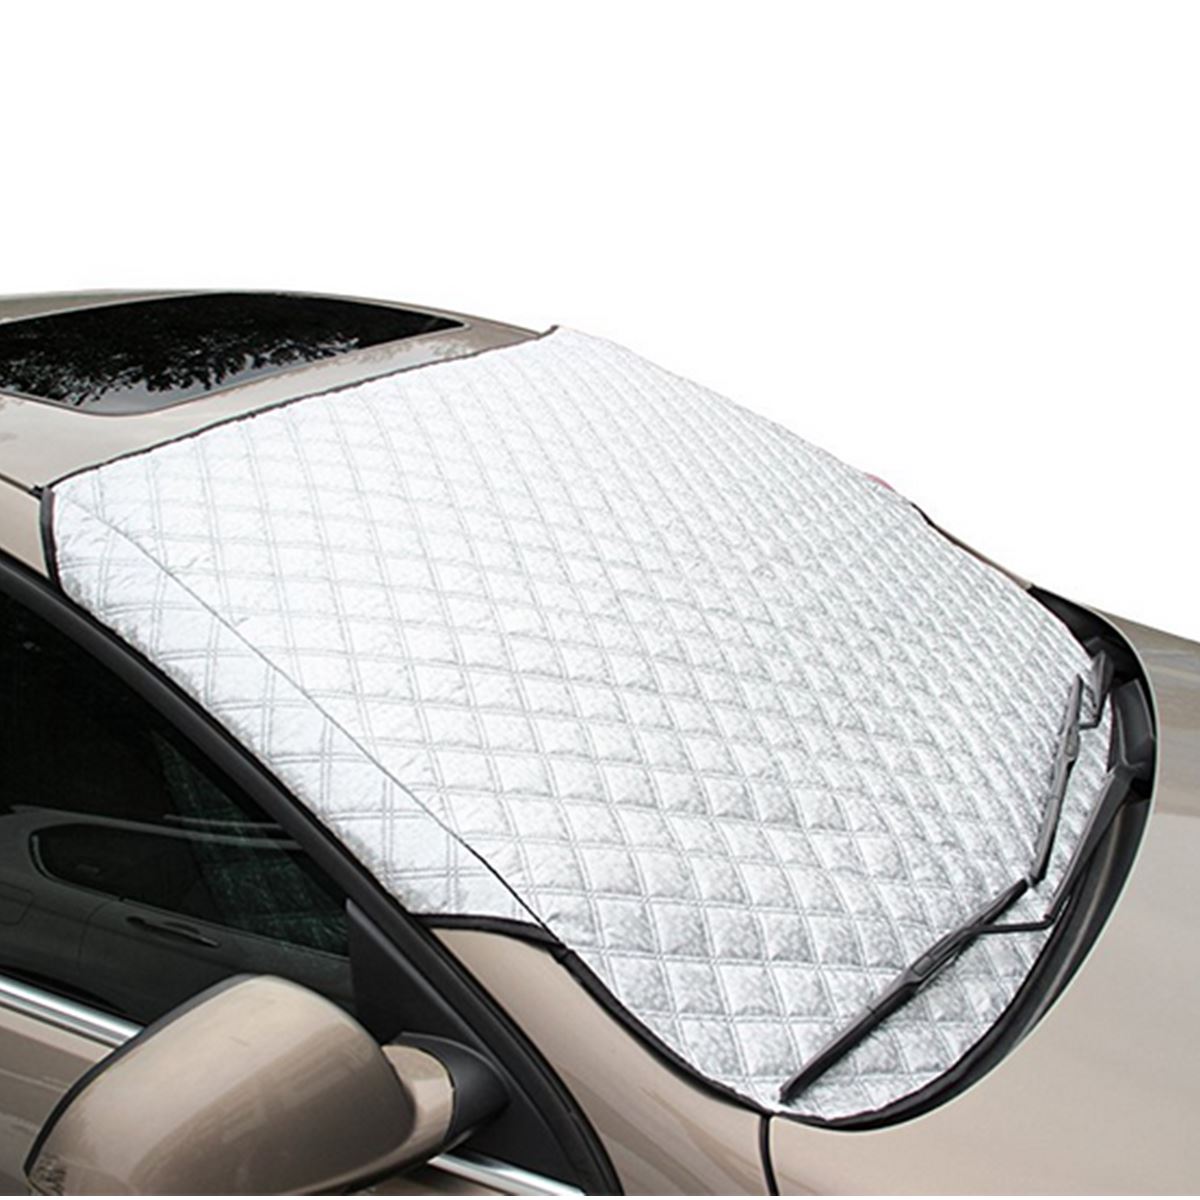 Car Windshield Snow Cover with 4 Layers Protection Car accessories EvoFine 